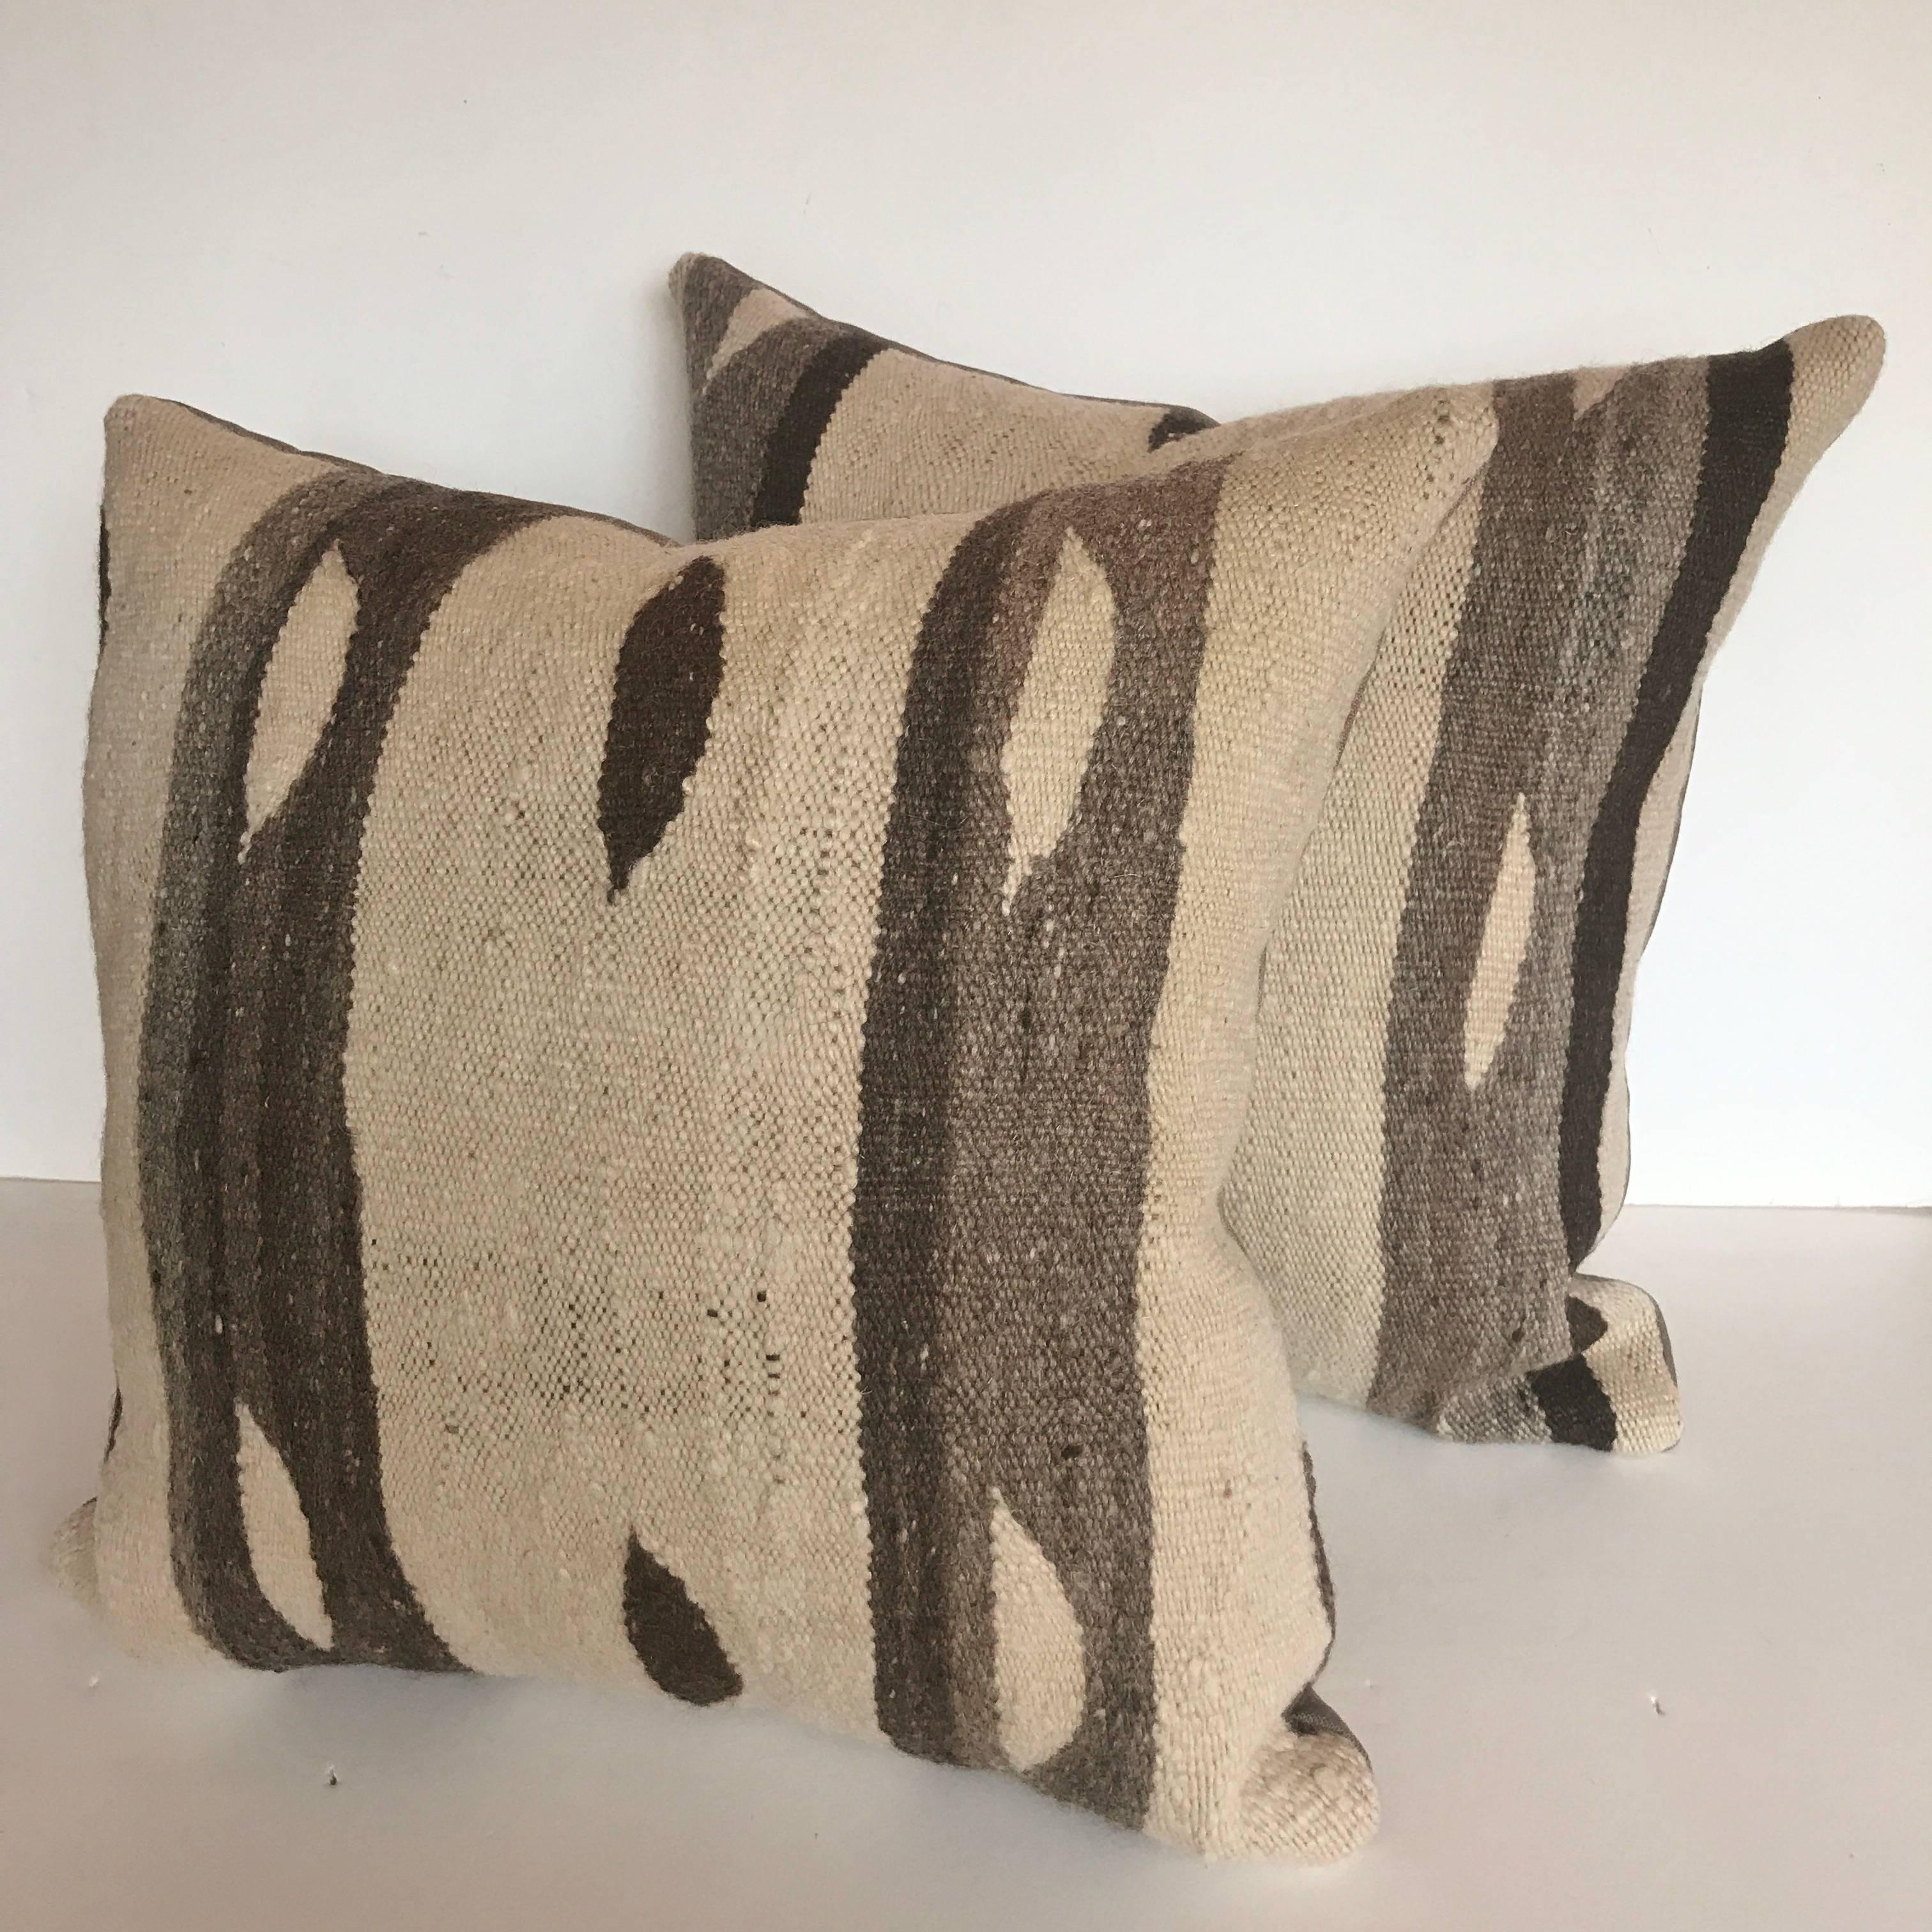 Custom pair of pillows cut from a vintage hand loomed wool Moroccan Ourika Berber rug, High Atlas Mountains. Wool is soft with natural color. Pillows are backed in linen, filled with an insert of 50/50 down and feathers and hand-sewn closed. All